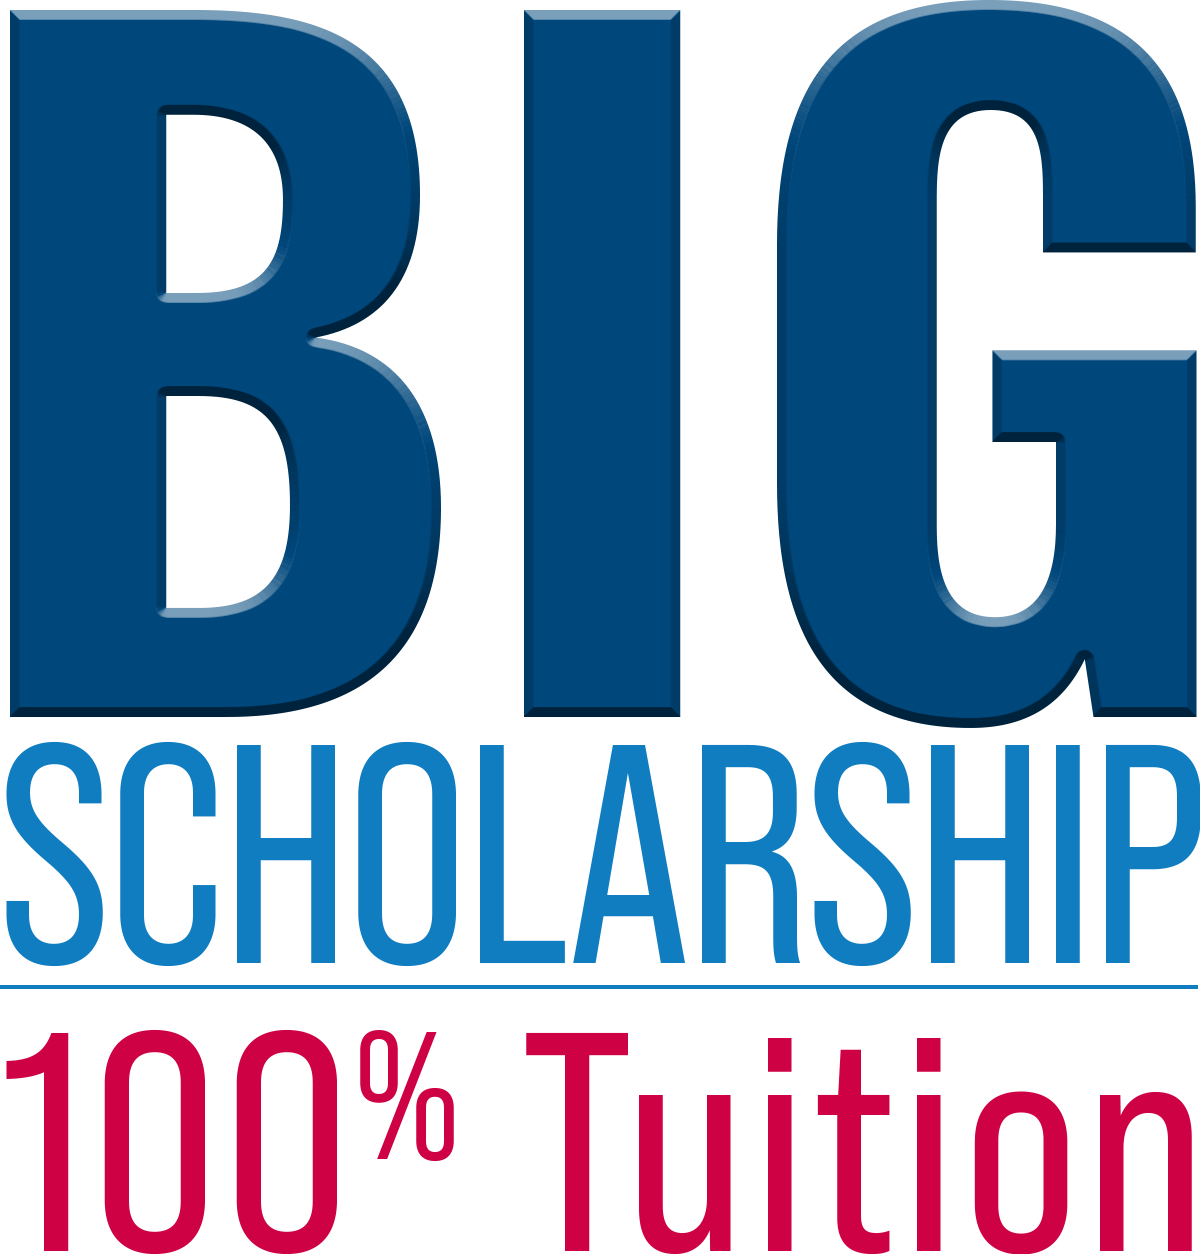 ABC's BIG Scholarship to cover 100% of tuition